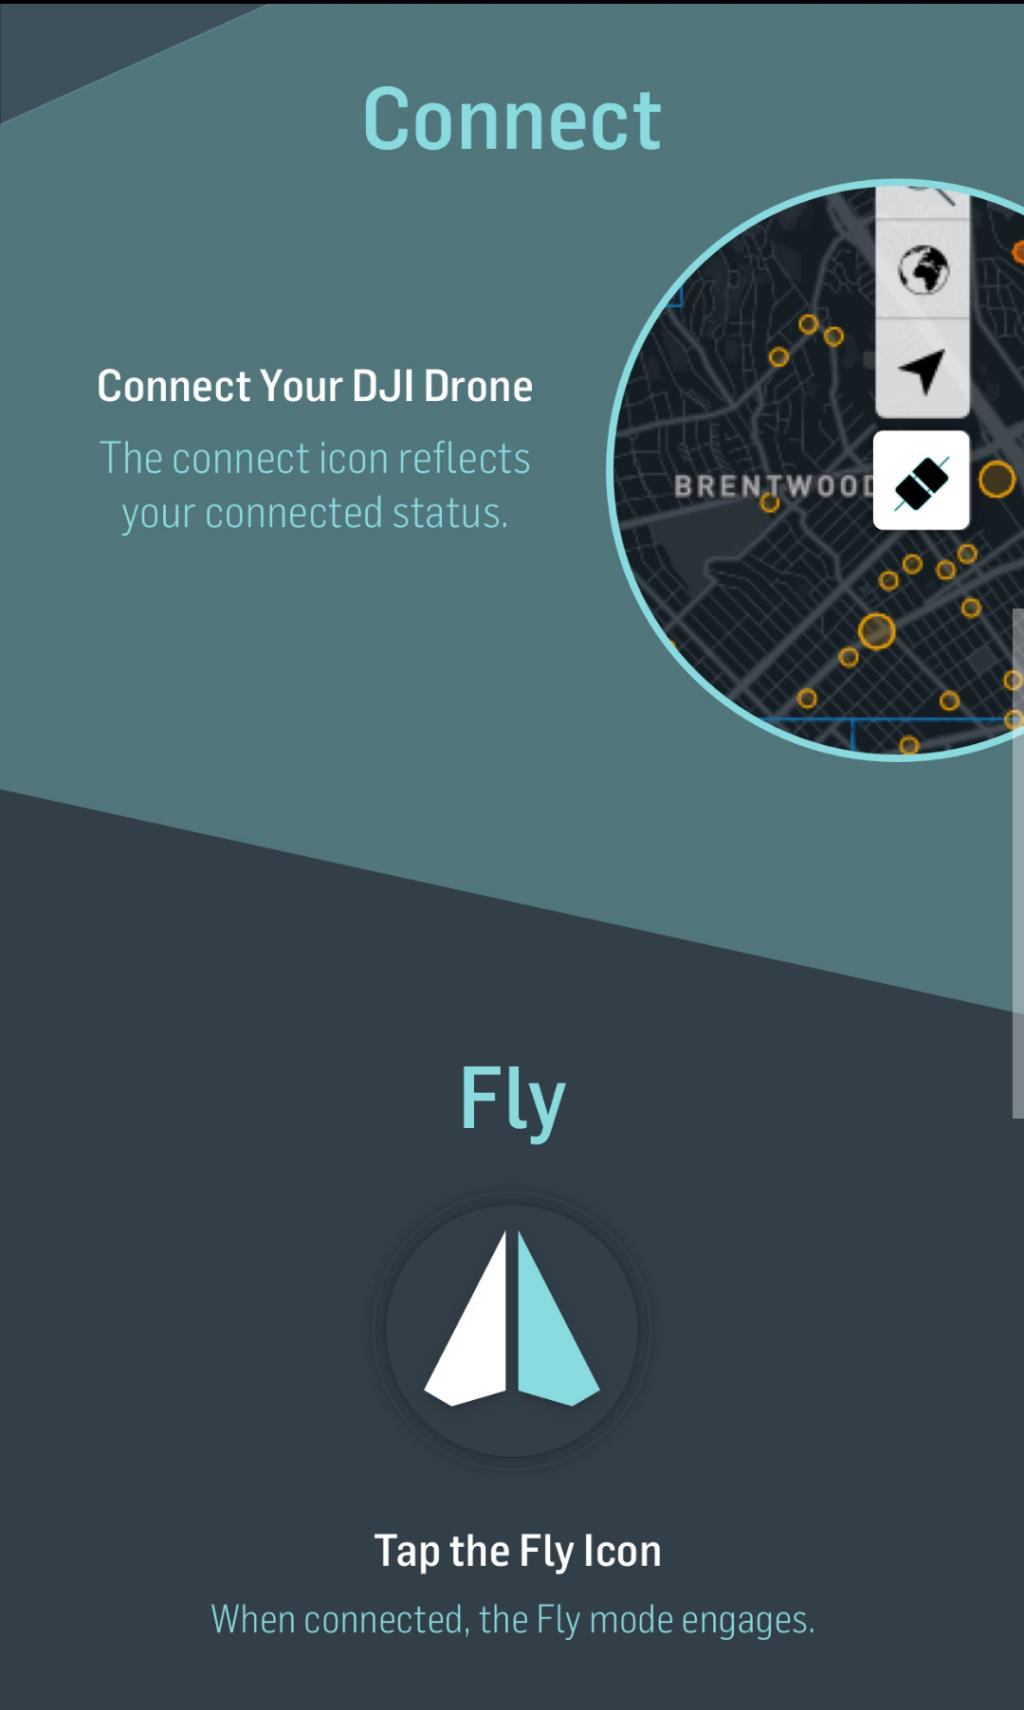 5 Important Checks to Make Before Flying a Drone